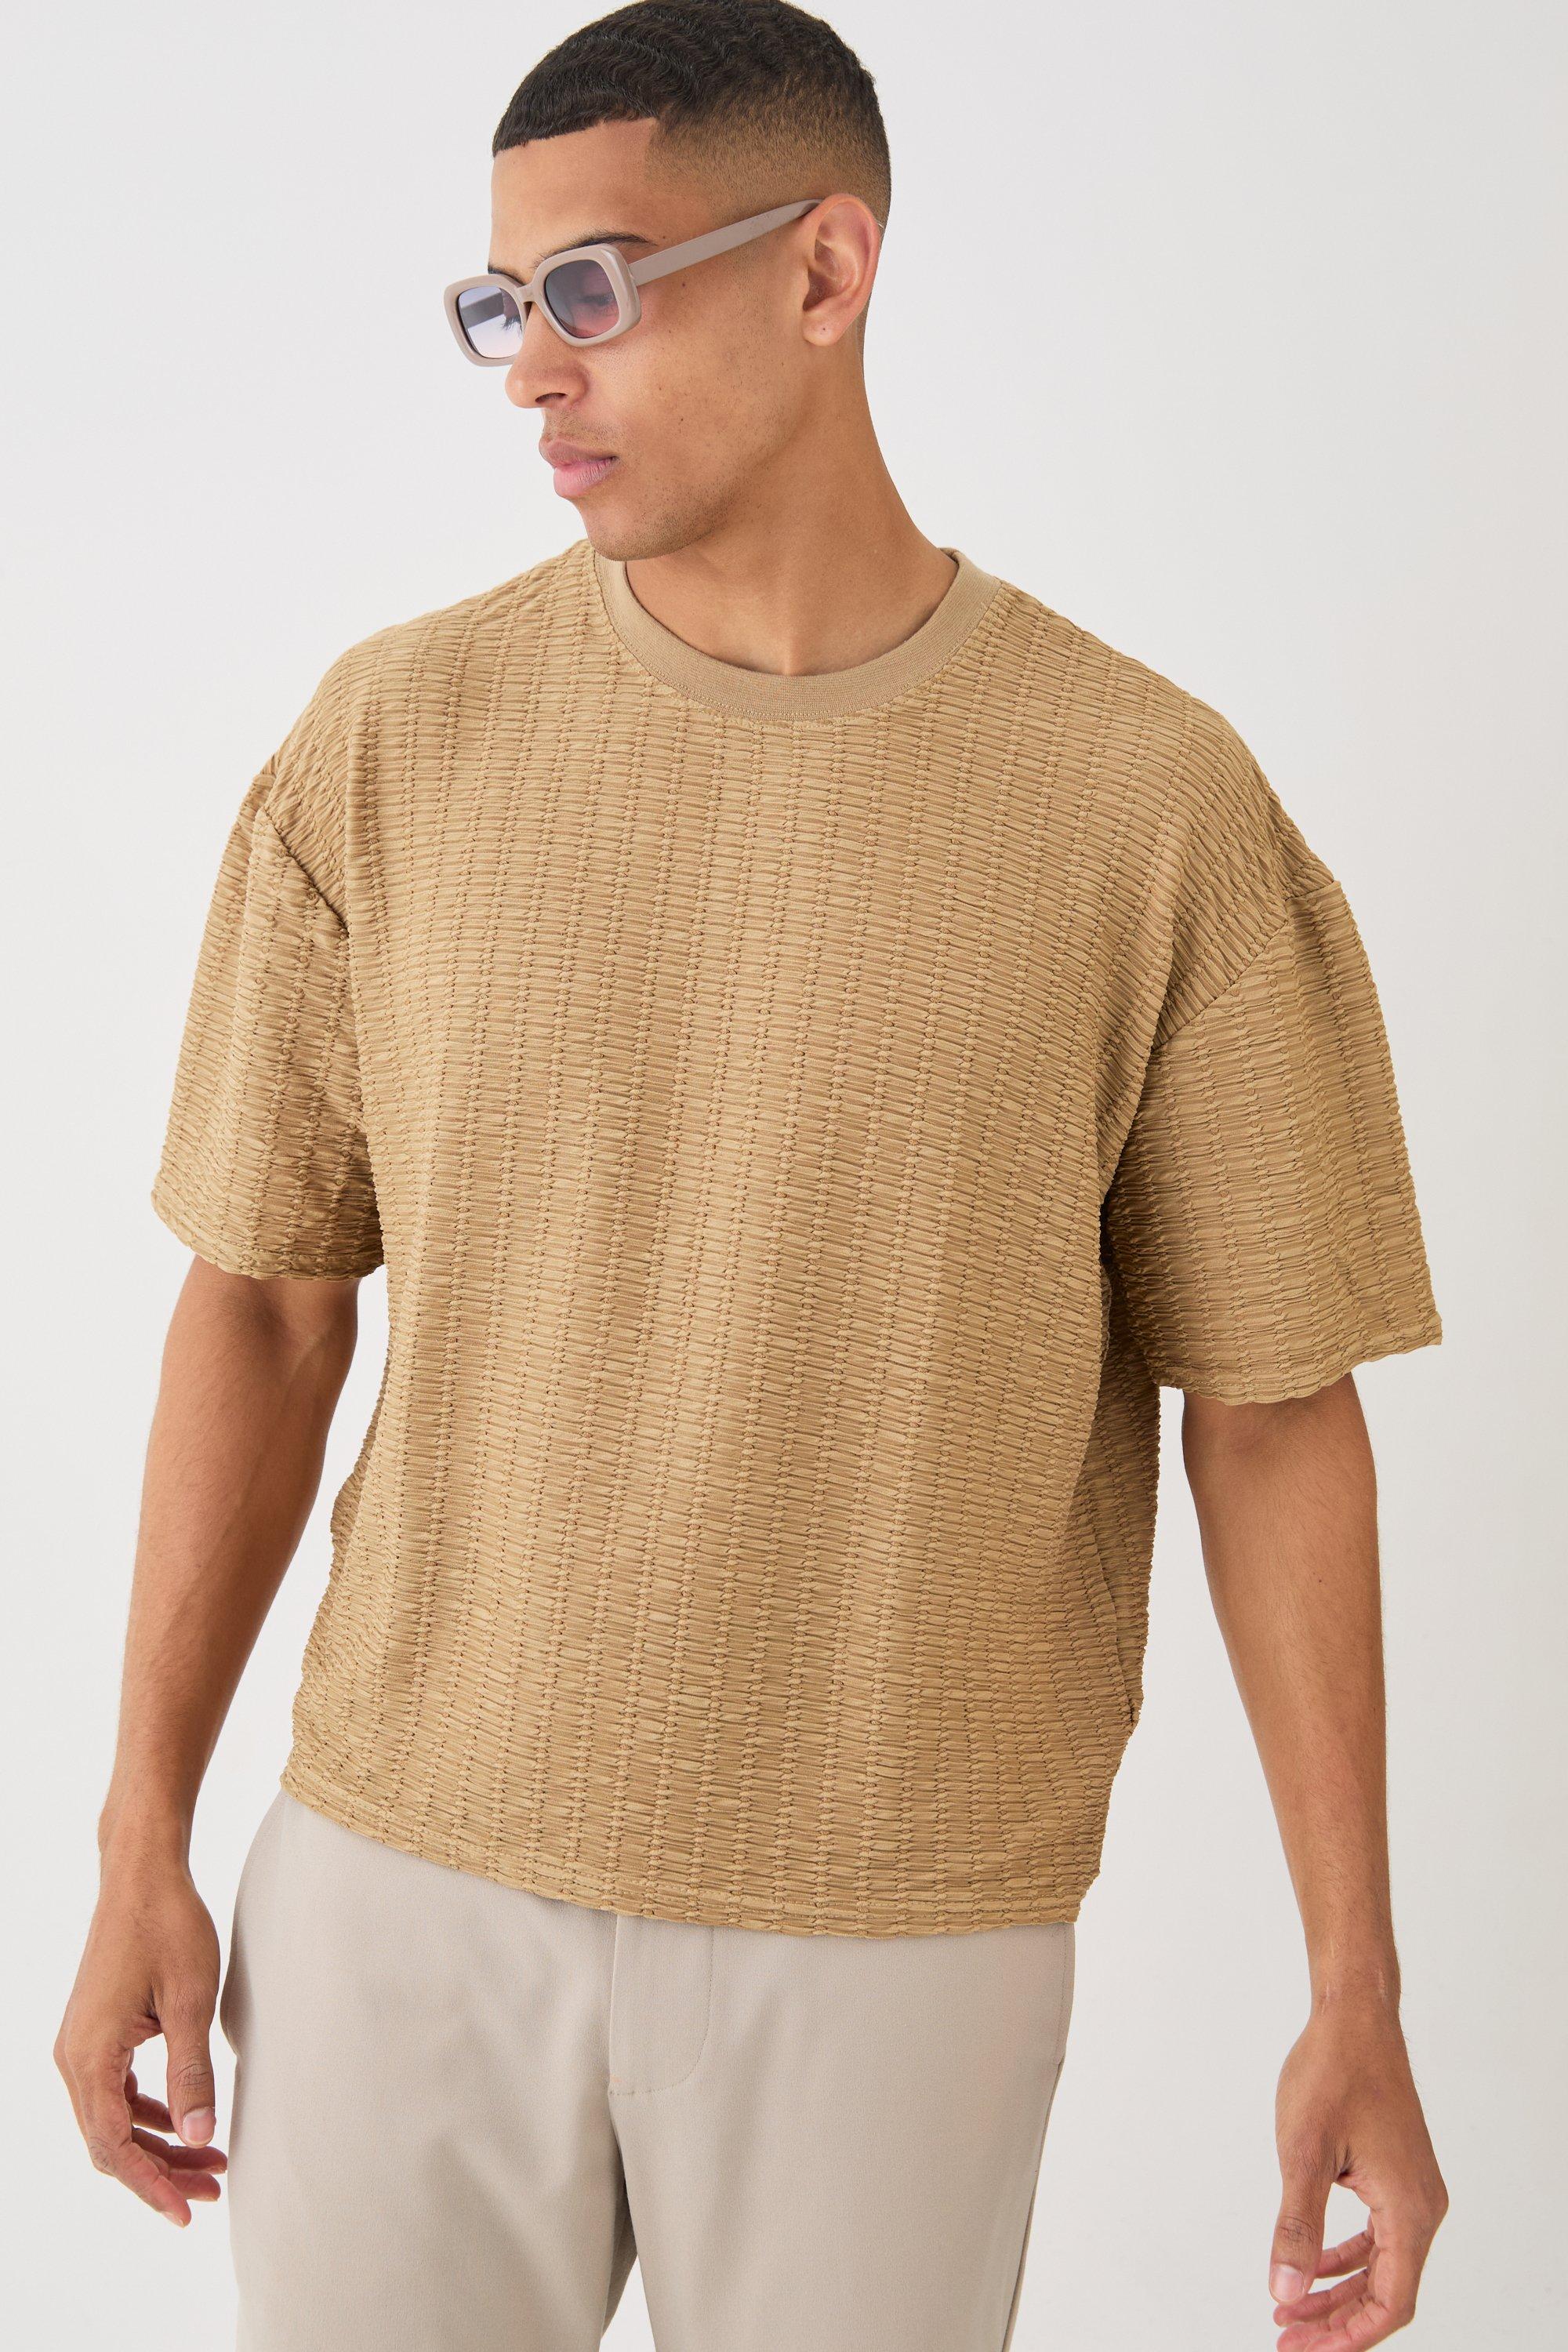 Image of Oversized Boxy Pleated Texture T-shirt, Brown